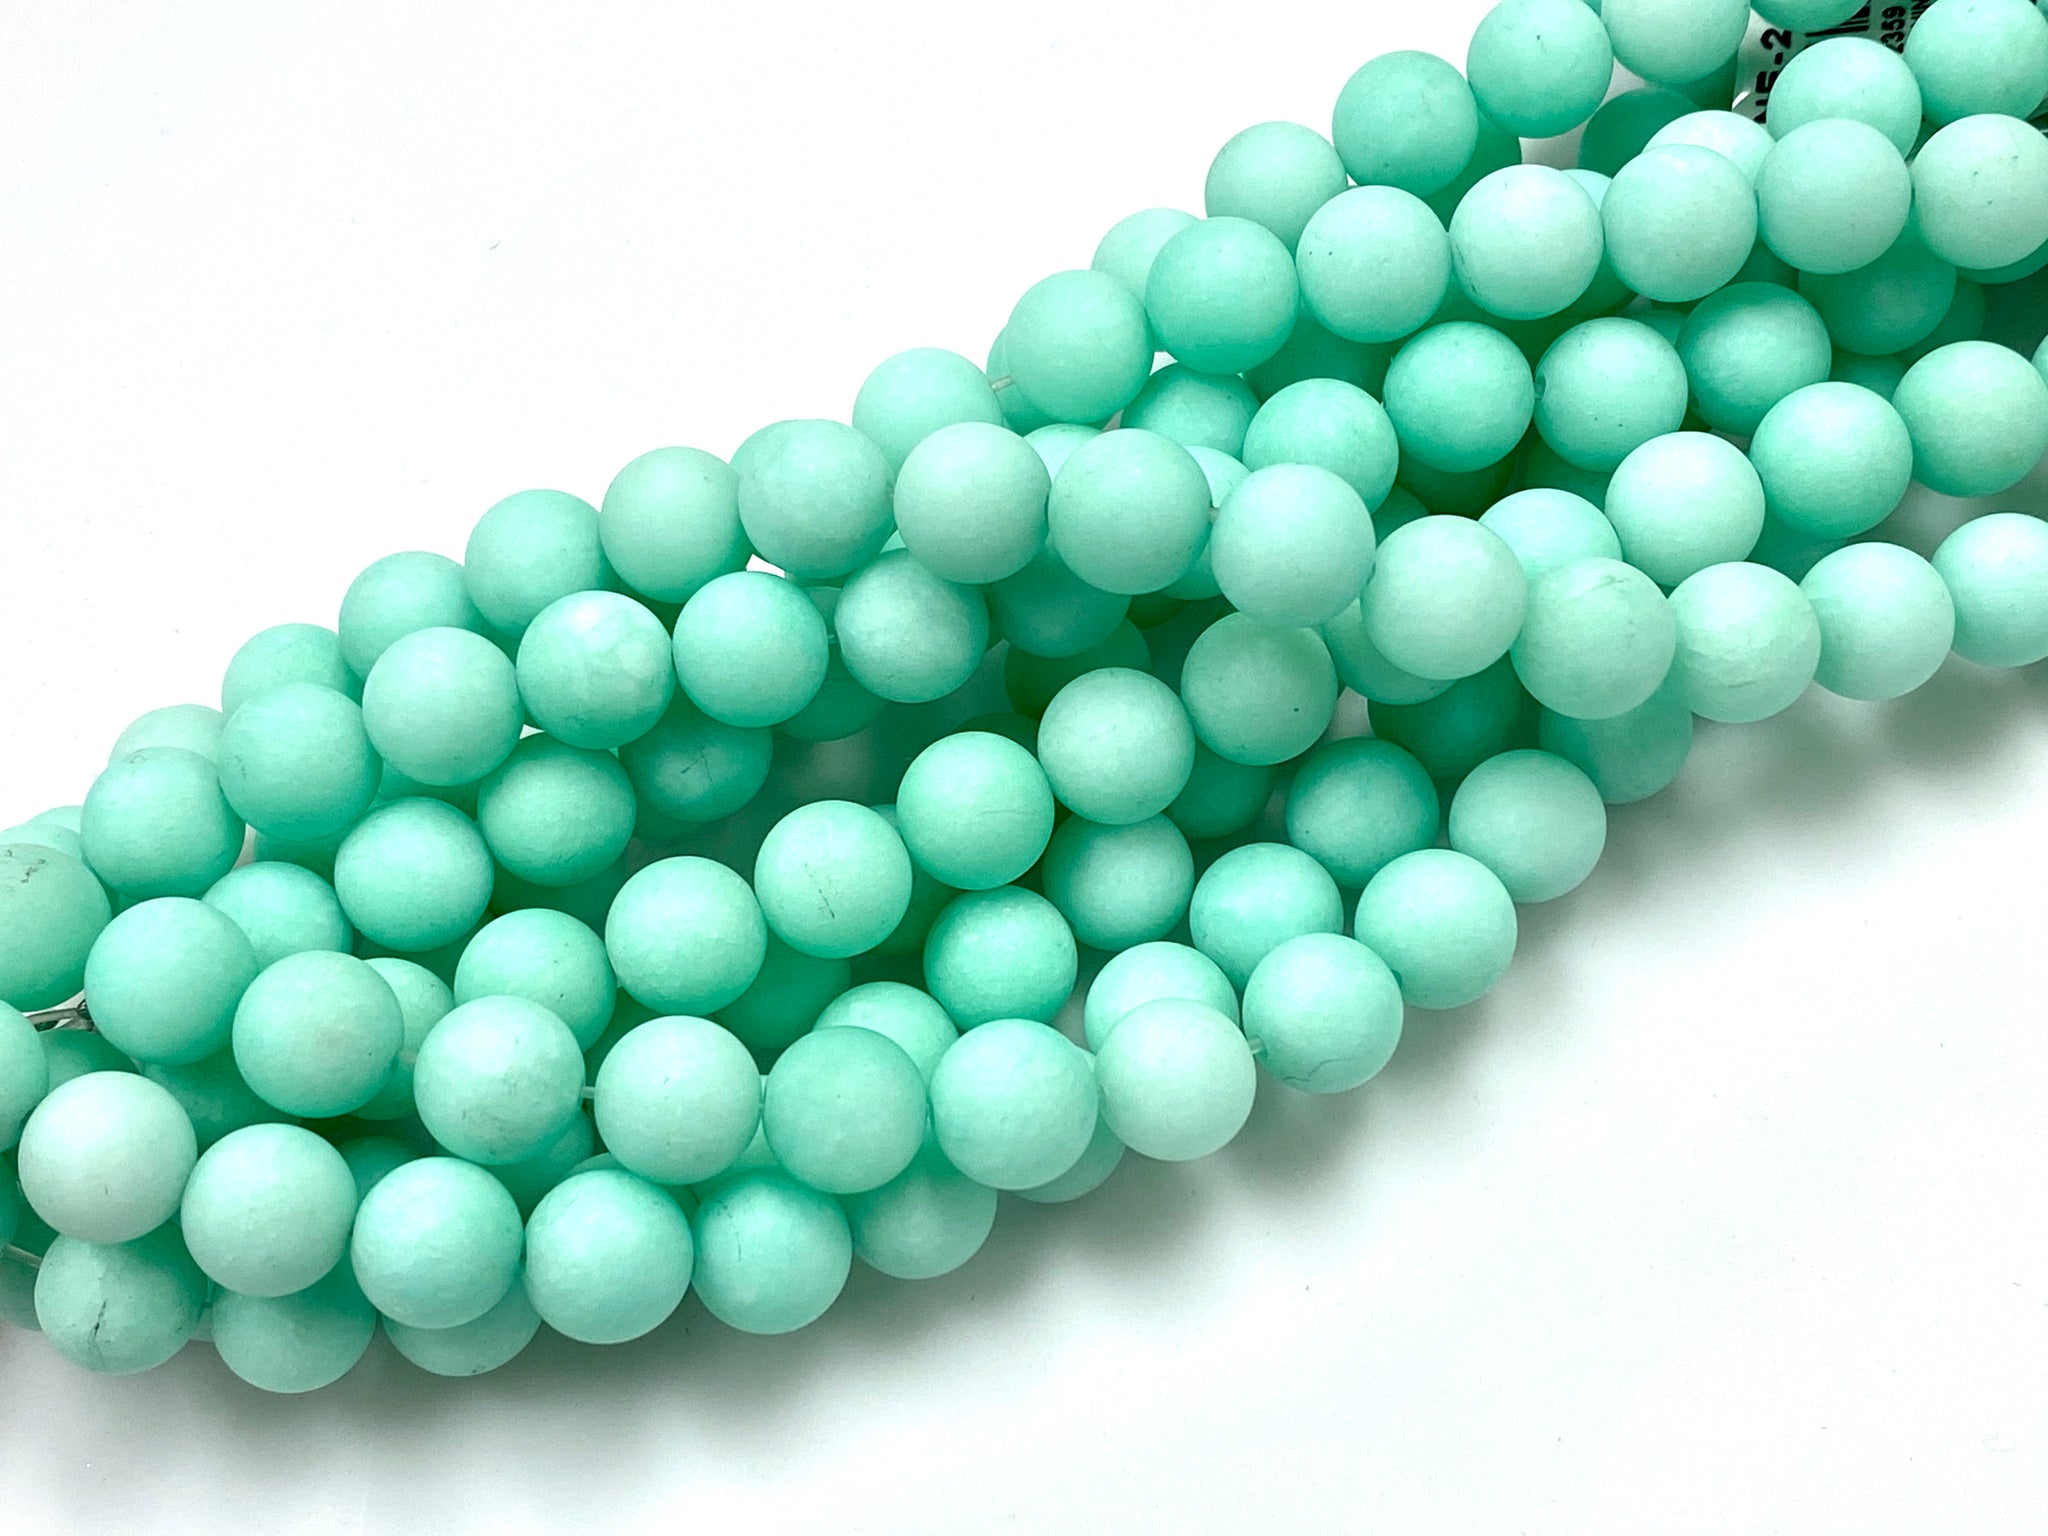 Natural Aqua Agate Gemstone Beads / Faceted Round Shape Beads / Healing Energy Stone Beads / 10mm 2 Strands Beads